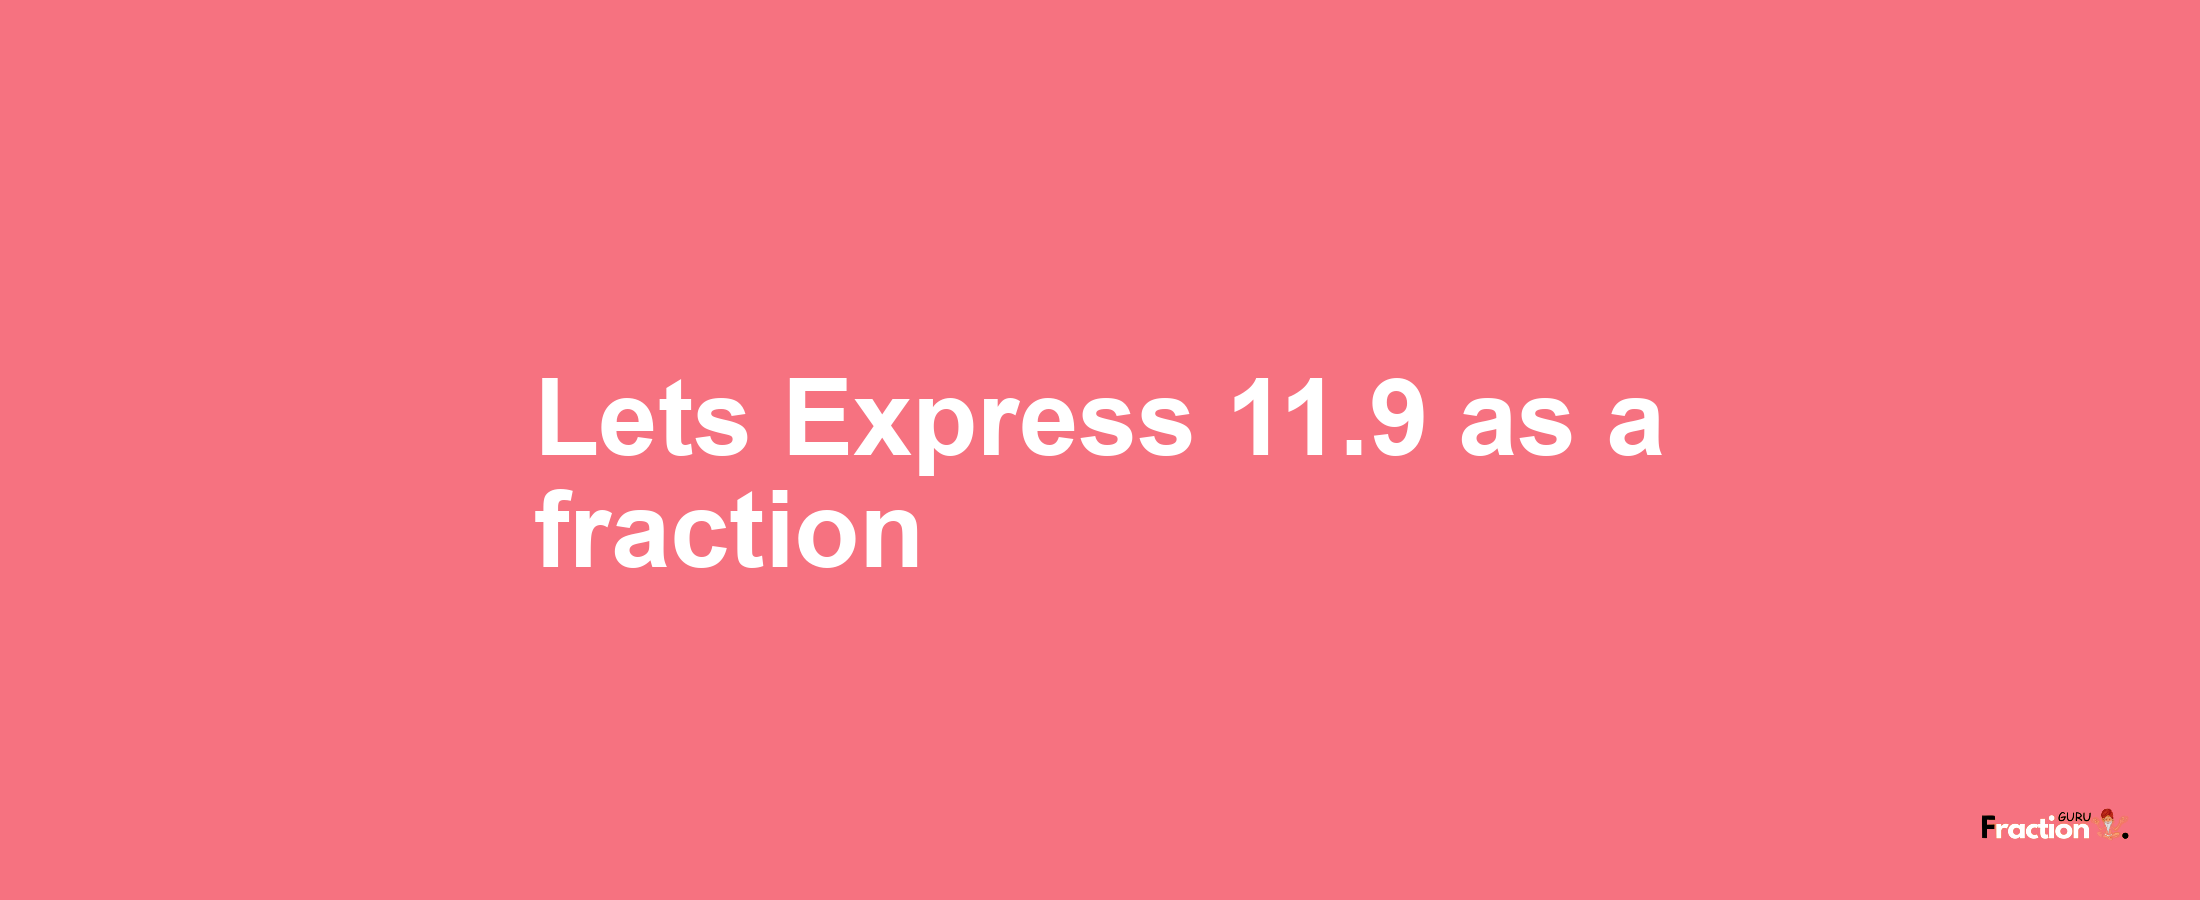 Lets Express 11.9 as afraction